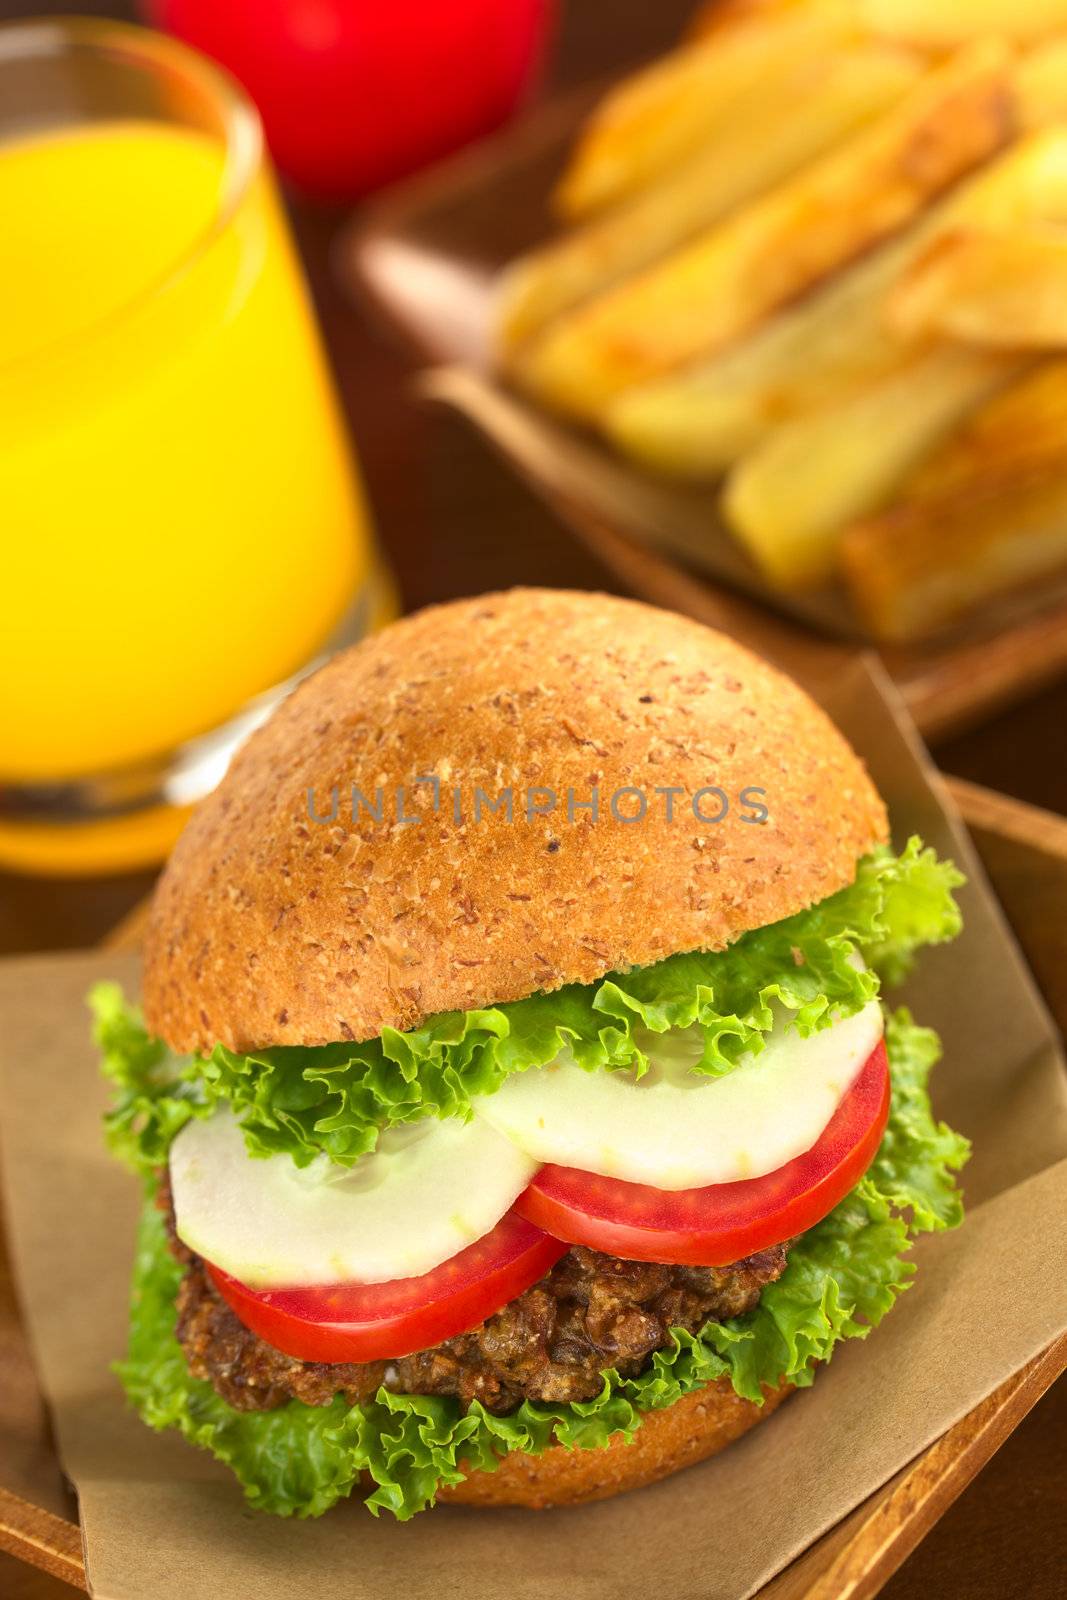 Vegetarian lentil burger in wholewheat bun with lettuce, tomato and cucumber accompanied by French fries and orange juice (Selective Focus, Focus on the front of the sandwich) 